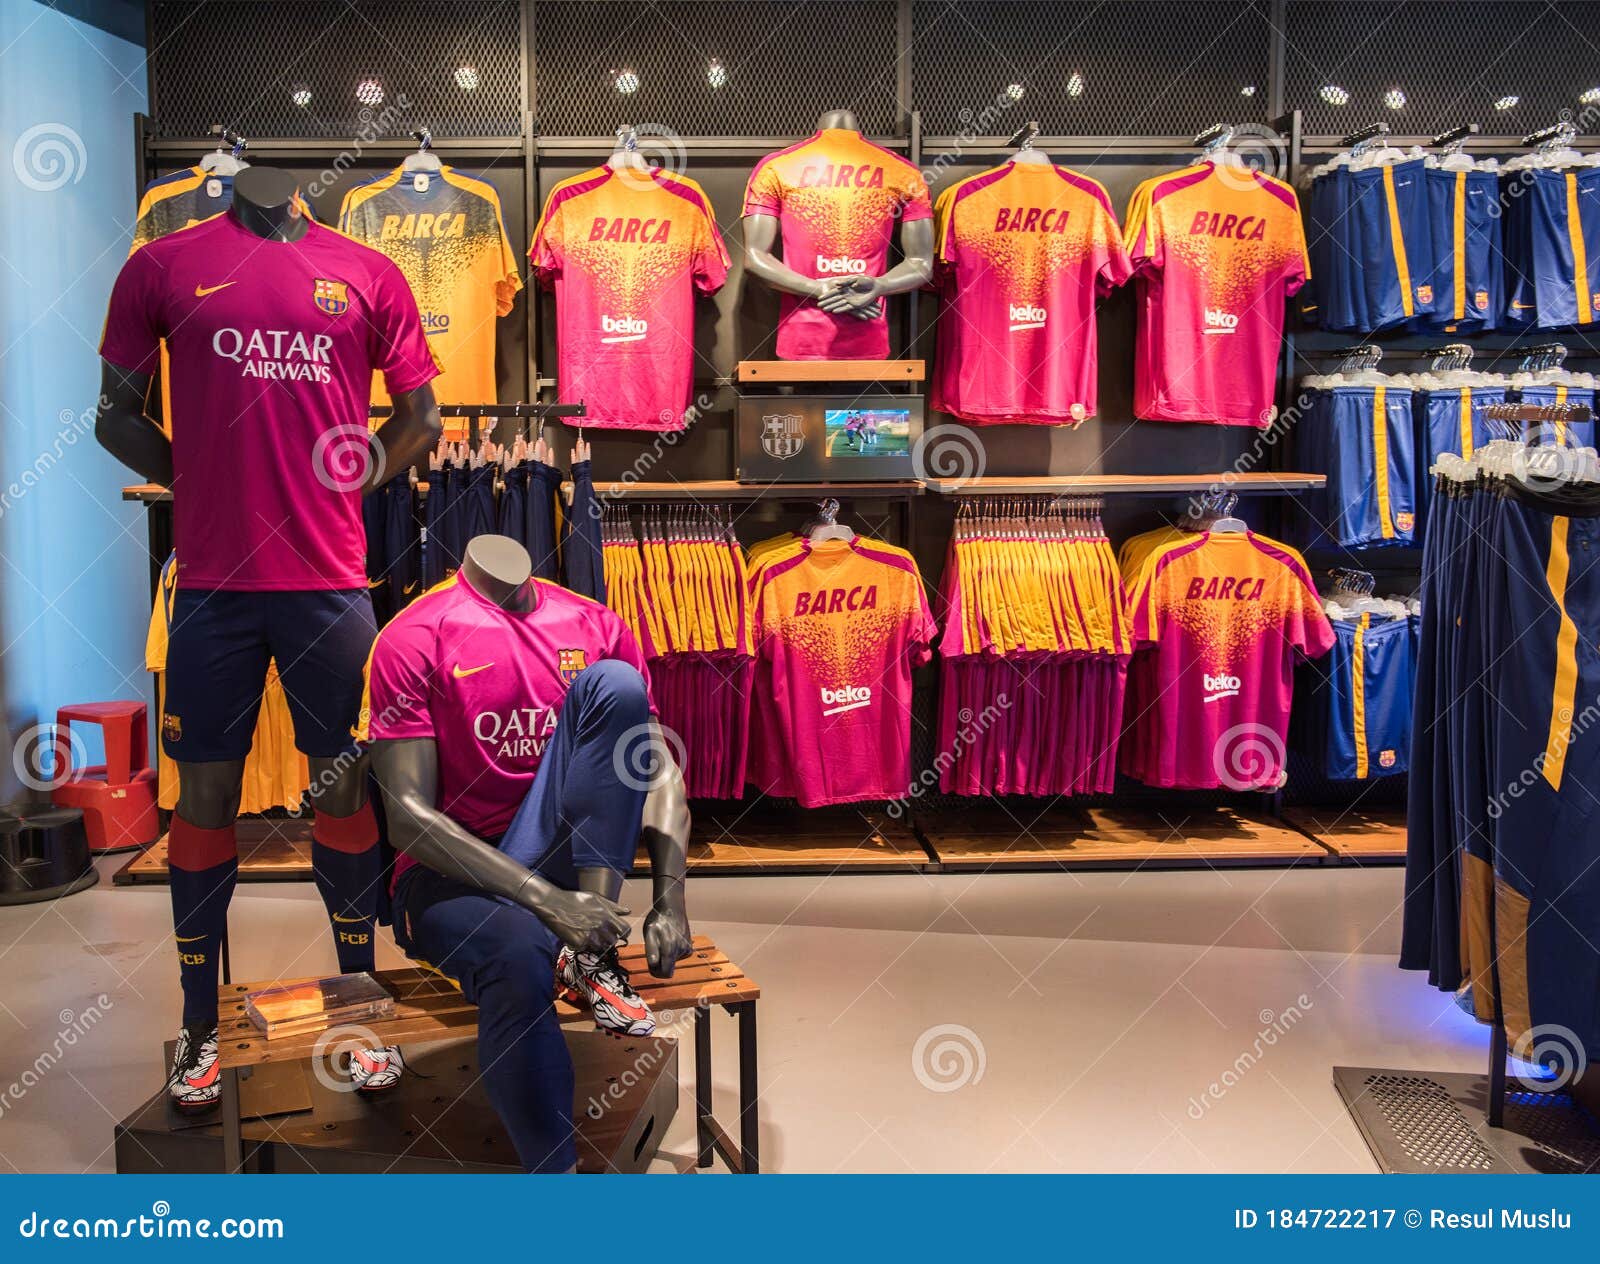 FC Official Store Megastore Photography - Image of experience, league: 184722217